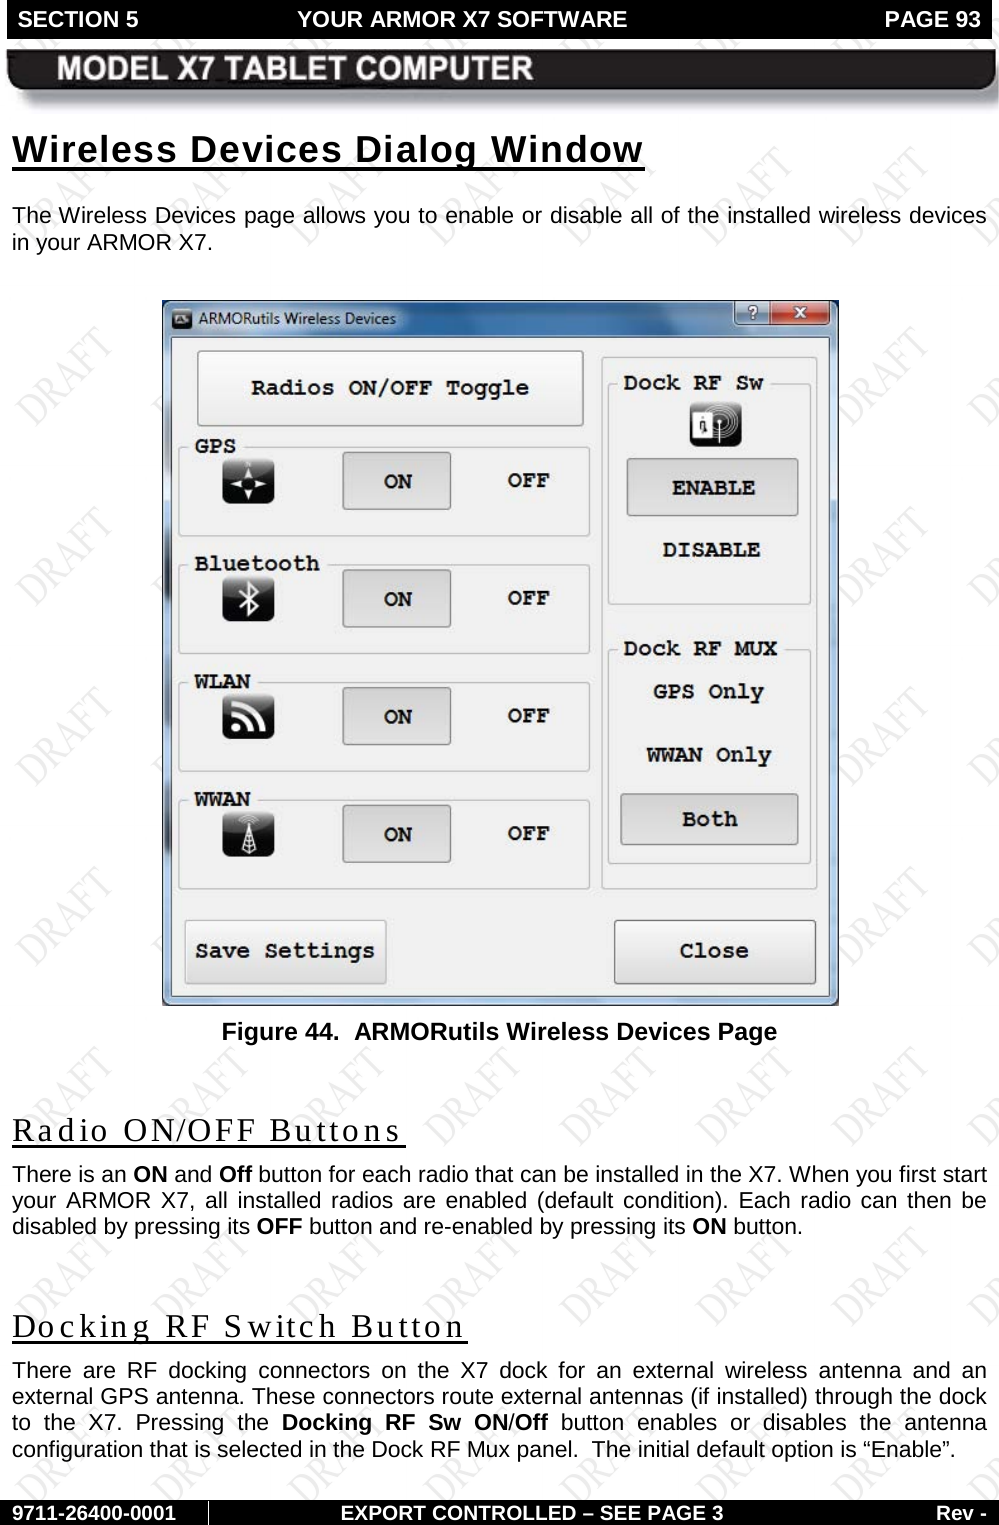 SECTION 5 YOUR ARMOR X7 SOFTWARE  PAGE 93        9711-26400-0001 EXPORT CONTROLLED – SEE PAGE 3 Rev - Wireless Devices Dialog Window The Wireless Devices page allows you to enable or disable all of the installed wireless devices in your ARMOR X7.    Figure 44.  ARMORutils Wireless Devices Page  Radio ON/OFF Buttons There is an ON and Off button for each radio that can be installed in the X7. When you first start your ARMOR X7, all installed radios are enabled (default condition). Each radio can then be disabled by pressing its OFF button and re-enabled by pressing its ON button.   Docking RF Switch Button There are RF docking connectors on the X7 dock for an external wireless antenna  and an external GPS antenna. These connectors route external antennas (if installed) through the dock to the X7.  Pressing the Docking RF Sw ON/Off button enables or disables the antenna configuration that is selected in the Dock RF Mux panel.  The initial default option is “Enable”. 